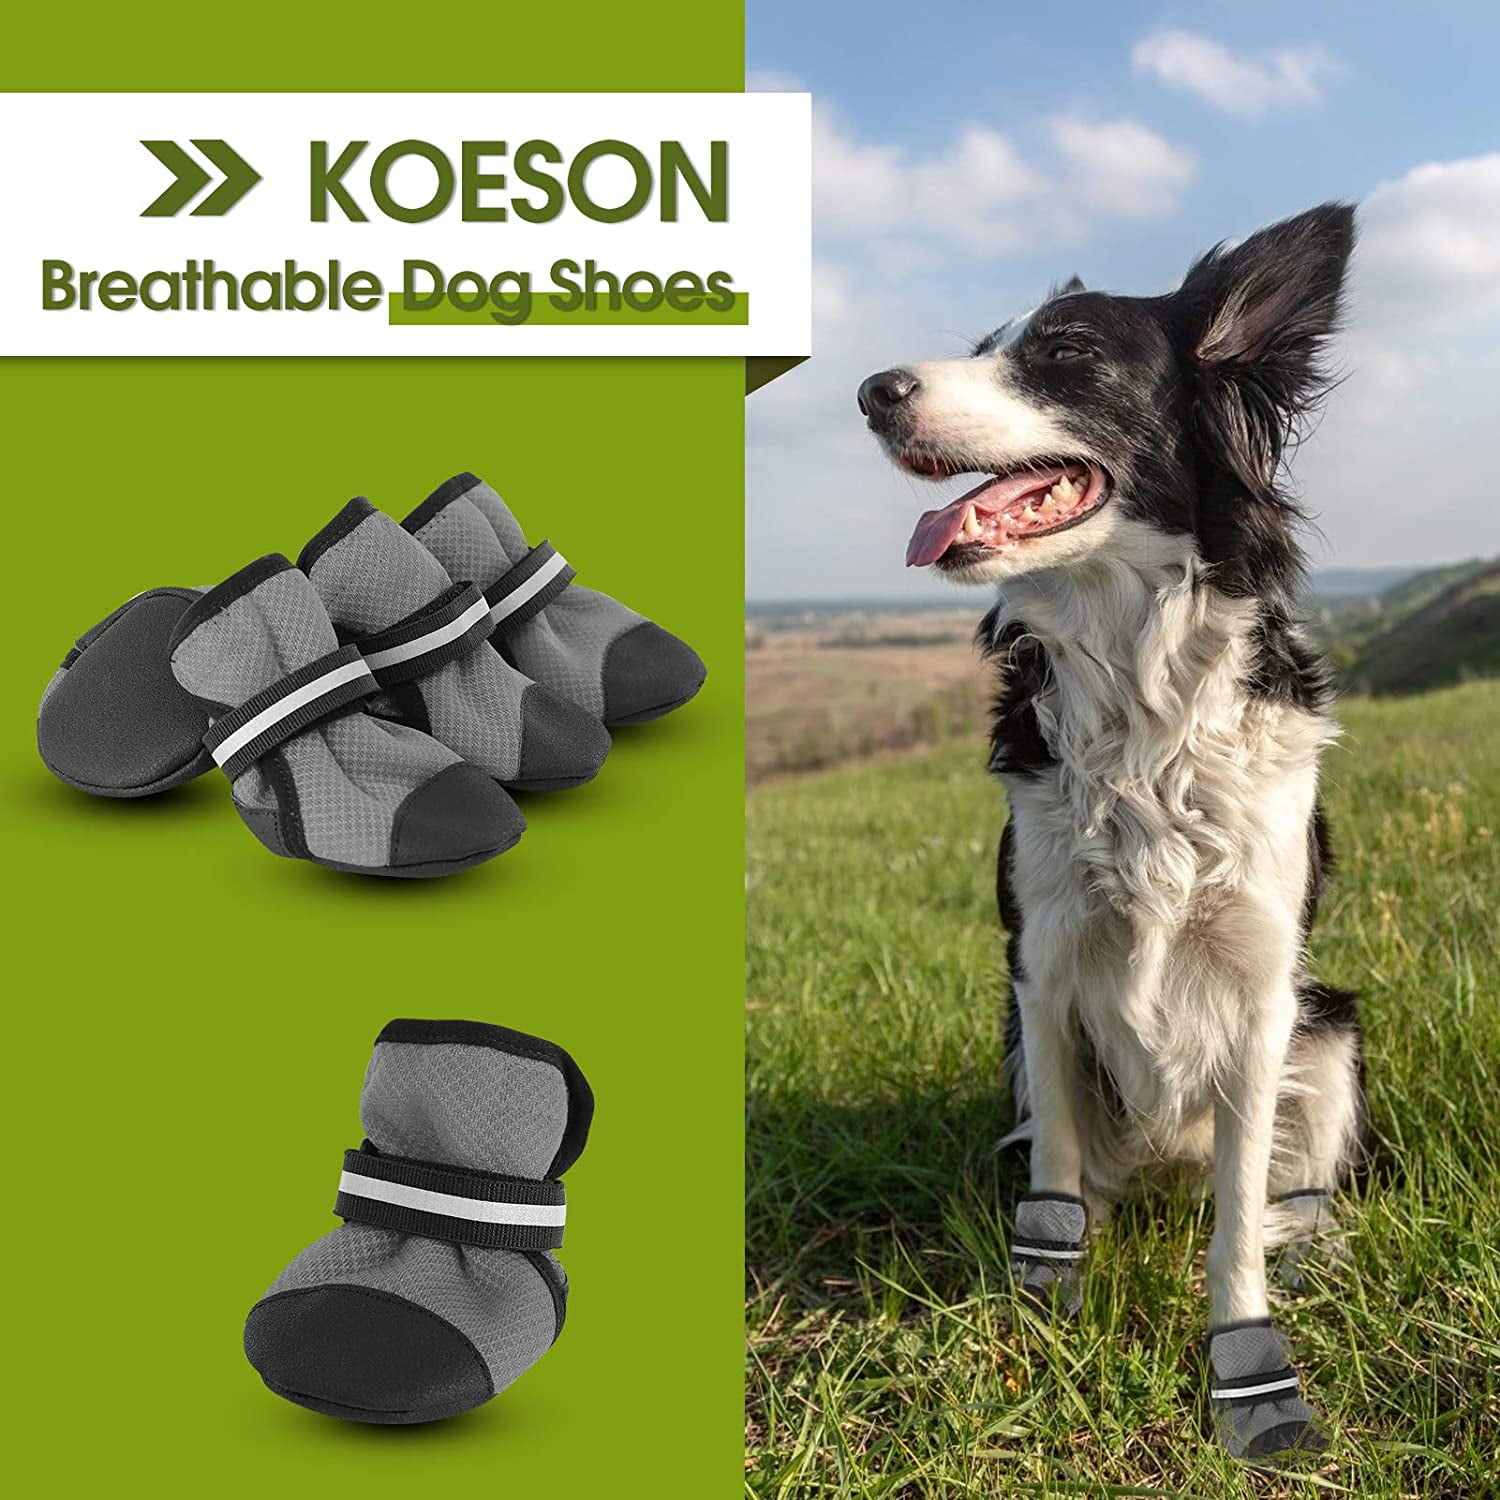 Adjustable Wear-Resistant Dog Booties with Reflective Tape for Small Medium Dogs Summer Dog Sneaker Shoes Paw Protector with Anti-Slip Sole KOESON Breathable Dog Boots 